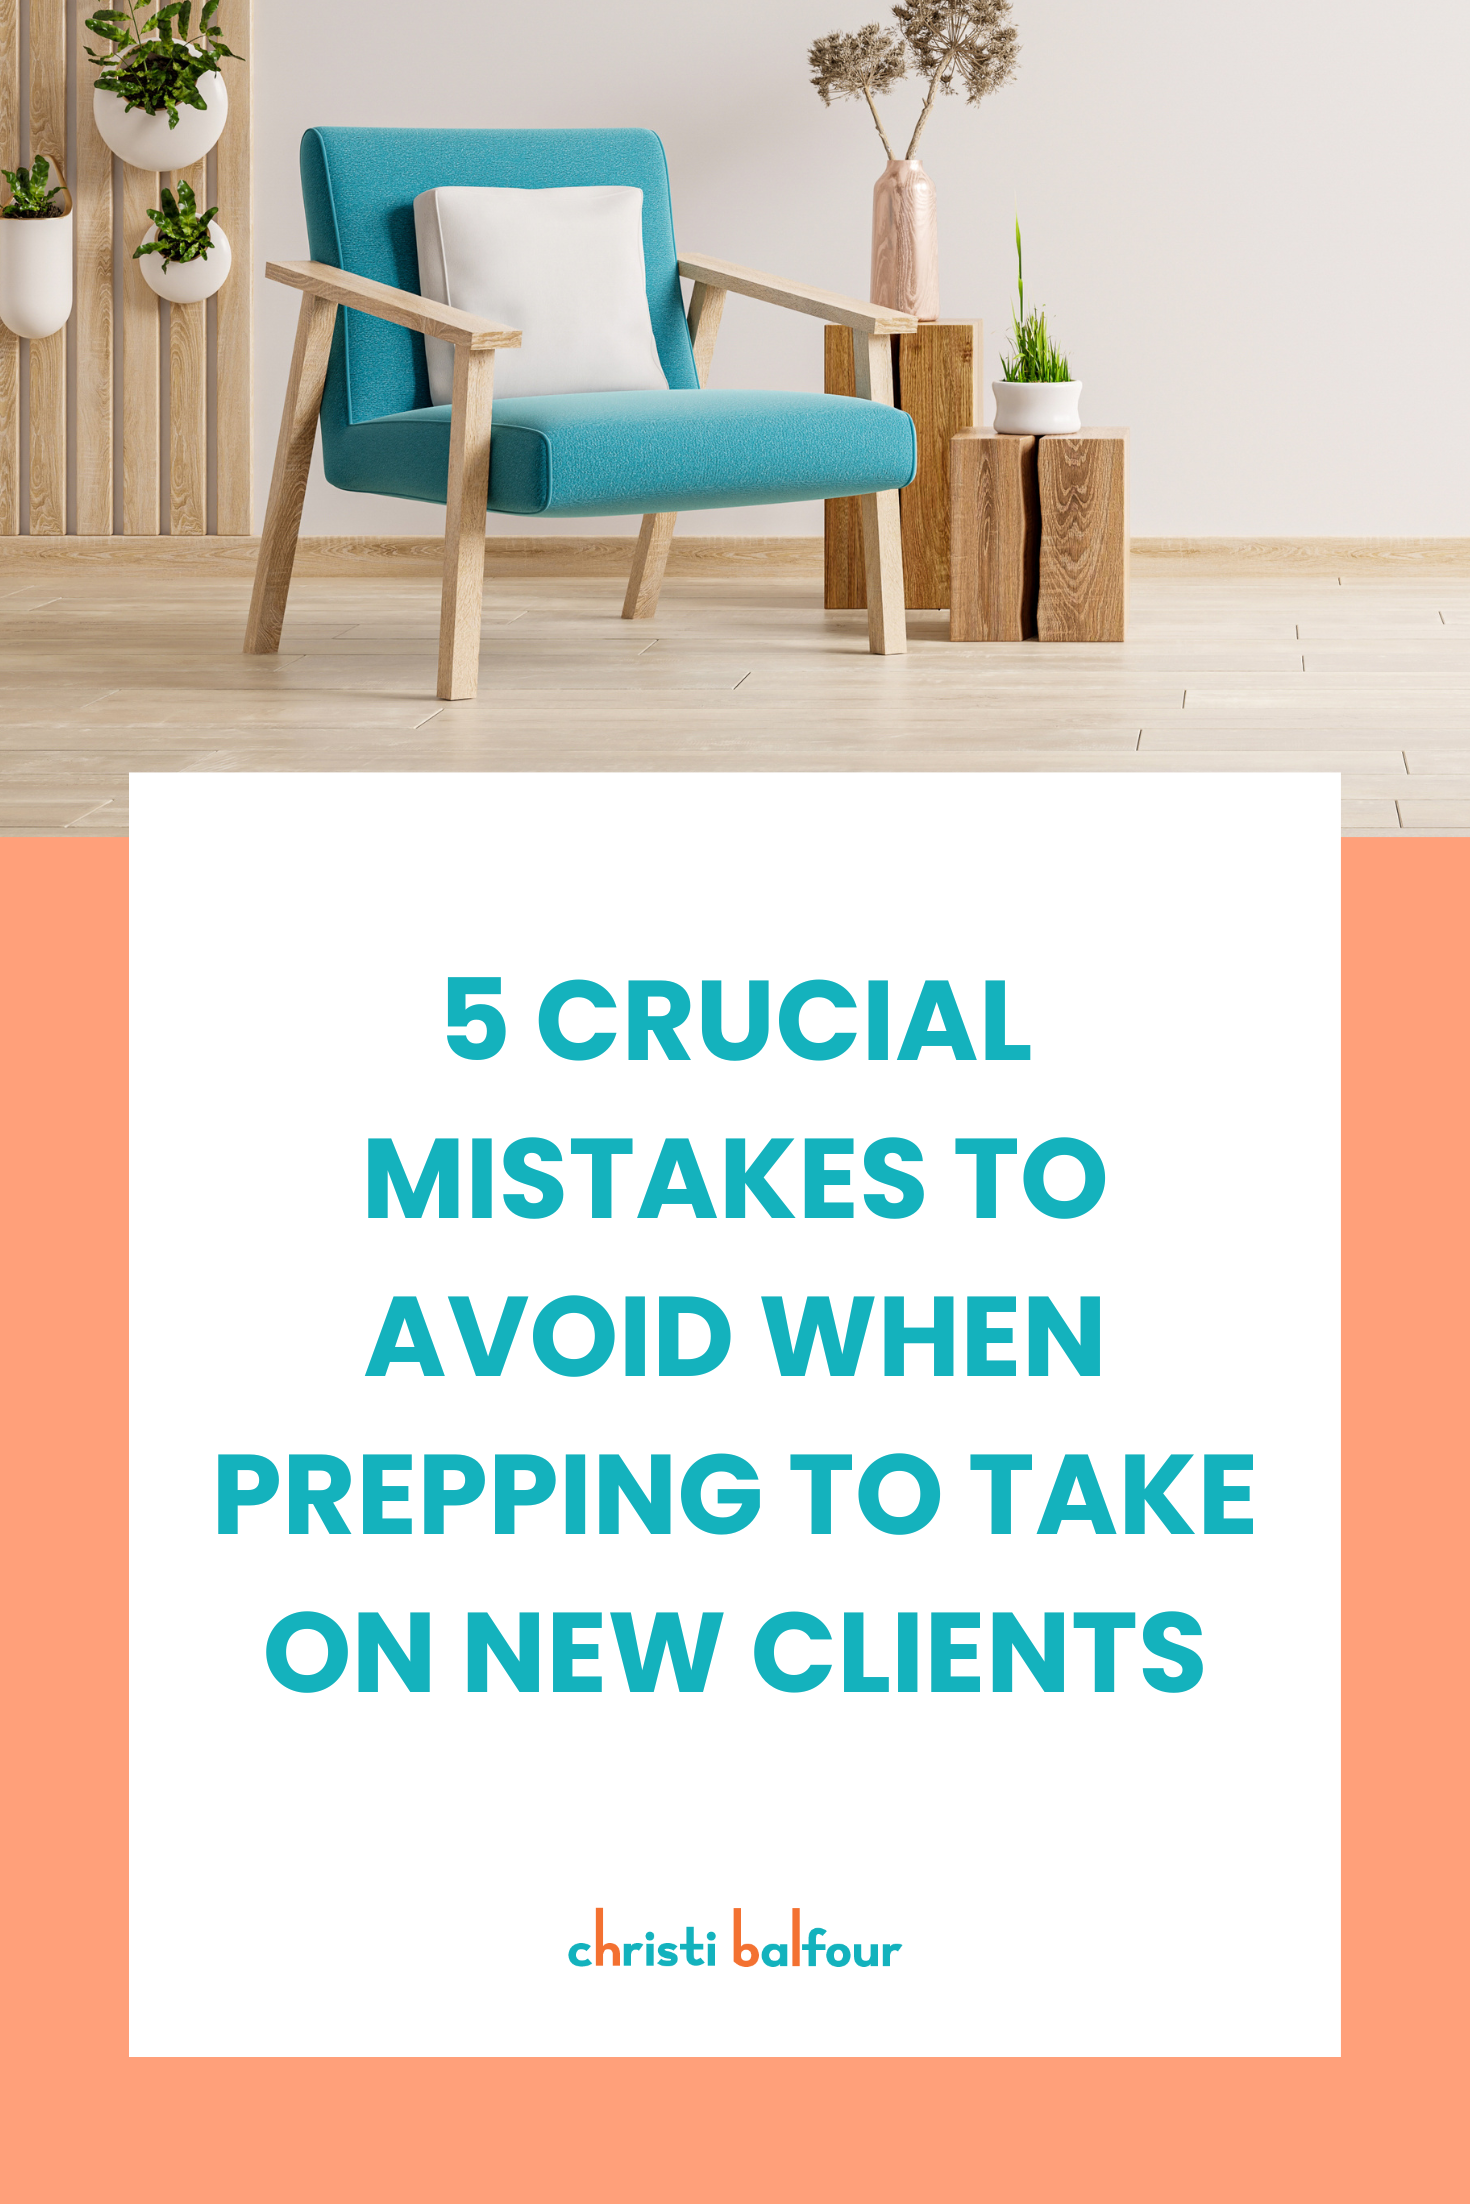 5 Crucial Mistakes to Avoid When Prepping to Take on New Clients